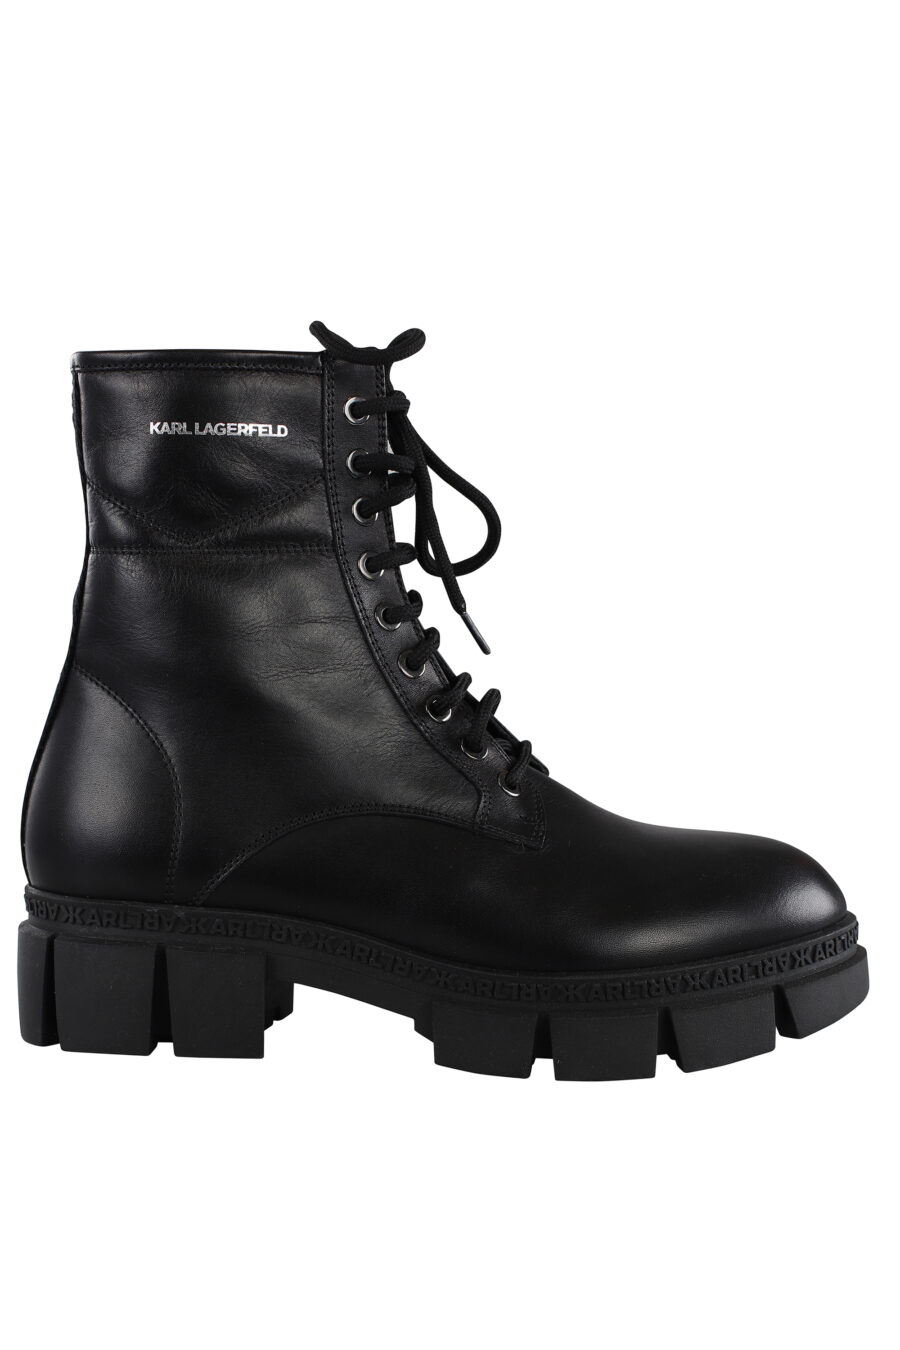 Black lace-up ankle boots with small white logo - IMG 7113